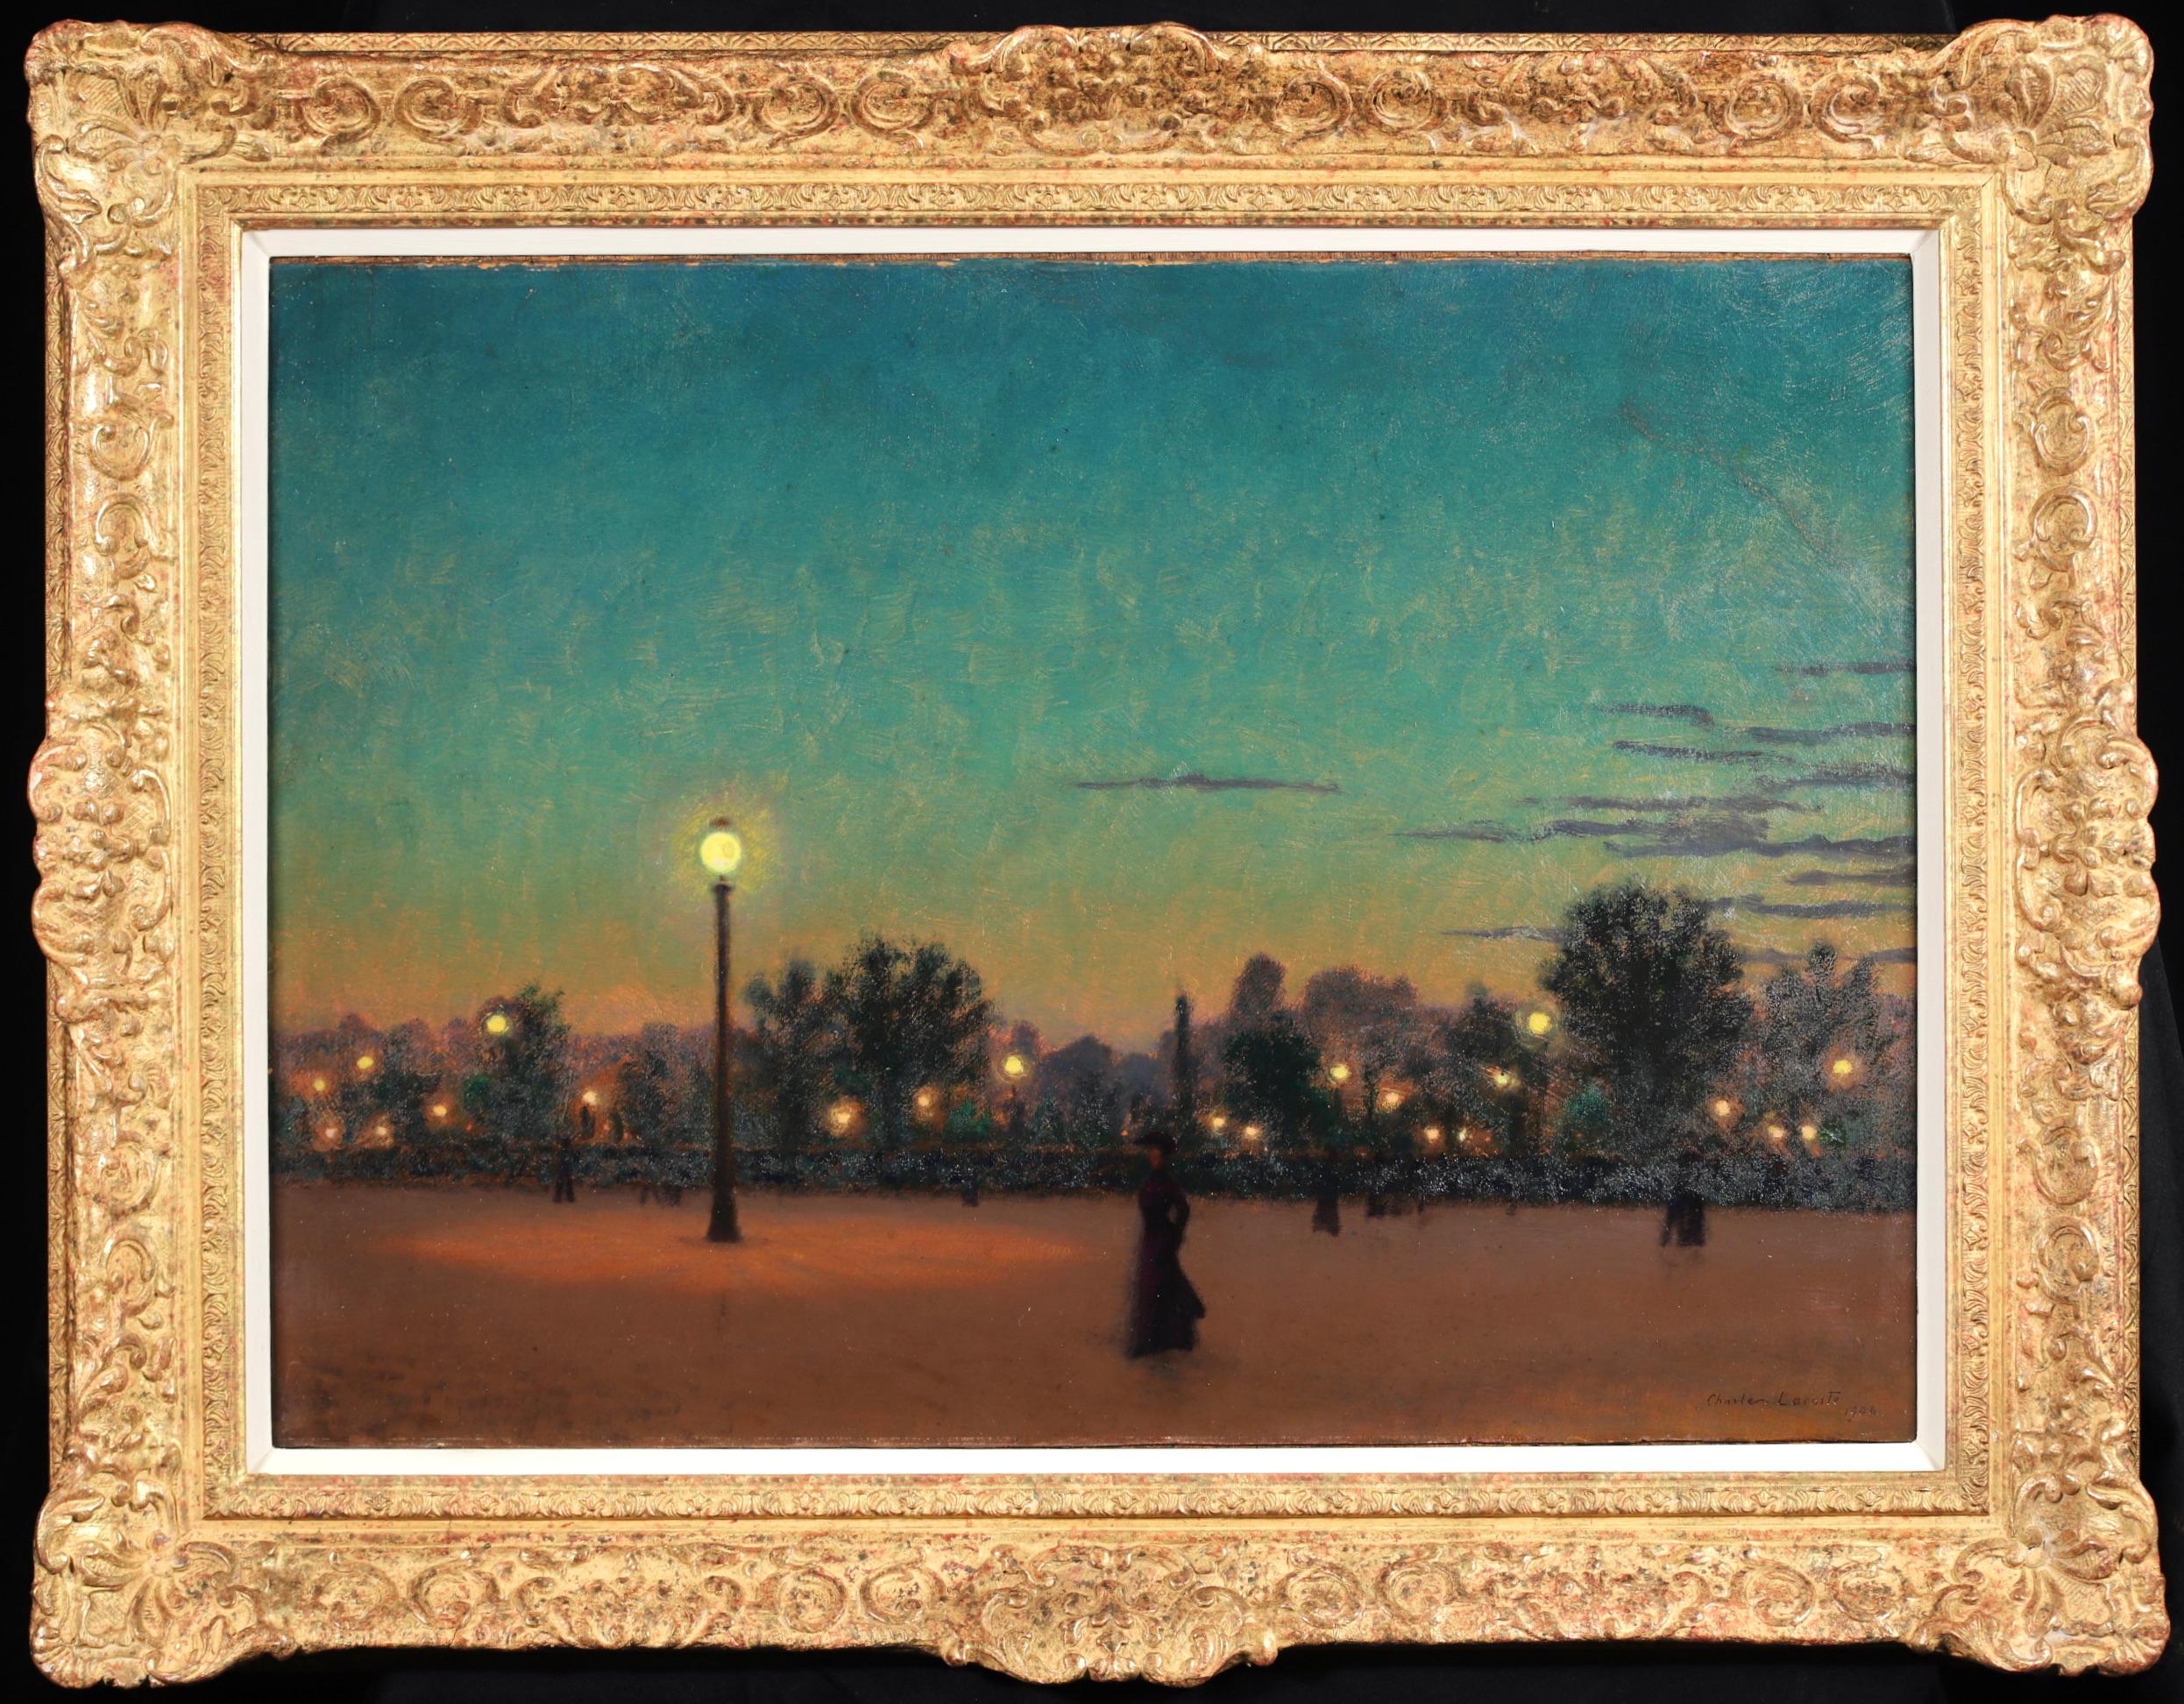 Signed and dated figure in landscape oil on board by French impressionist painter Charles Lacoste. A truly stunning piece with depicts a nighttime view of a Parisian street with a single woman dressed in a black coat and hat standing in the centre